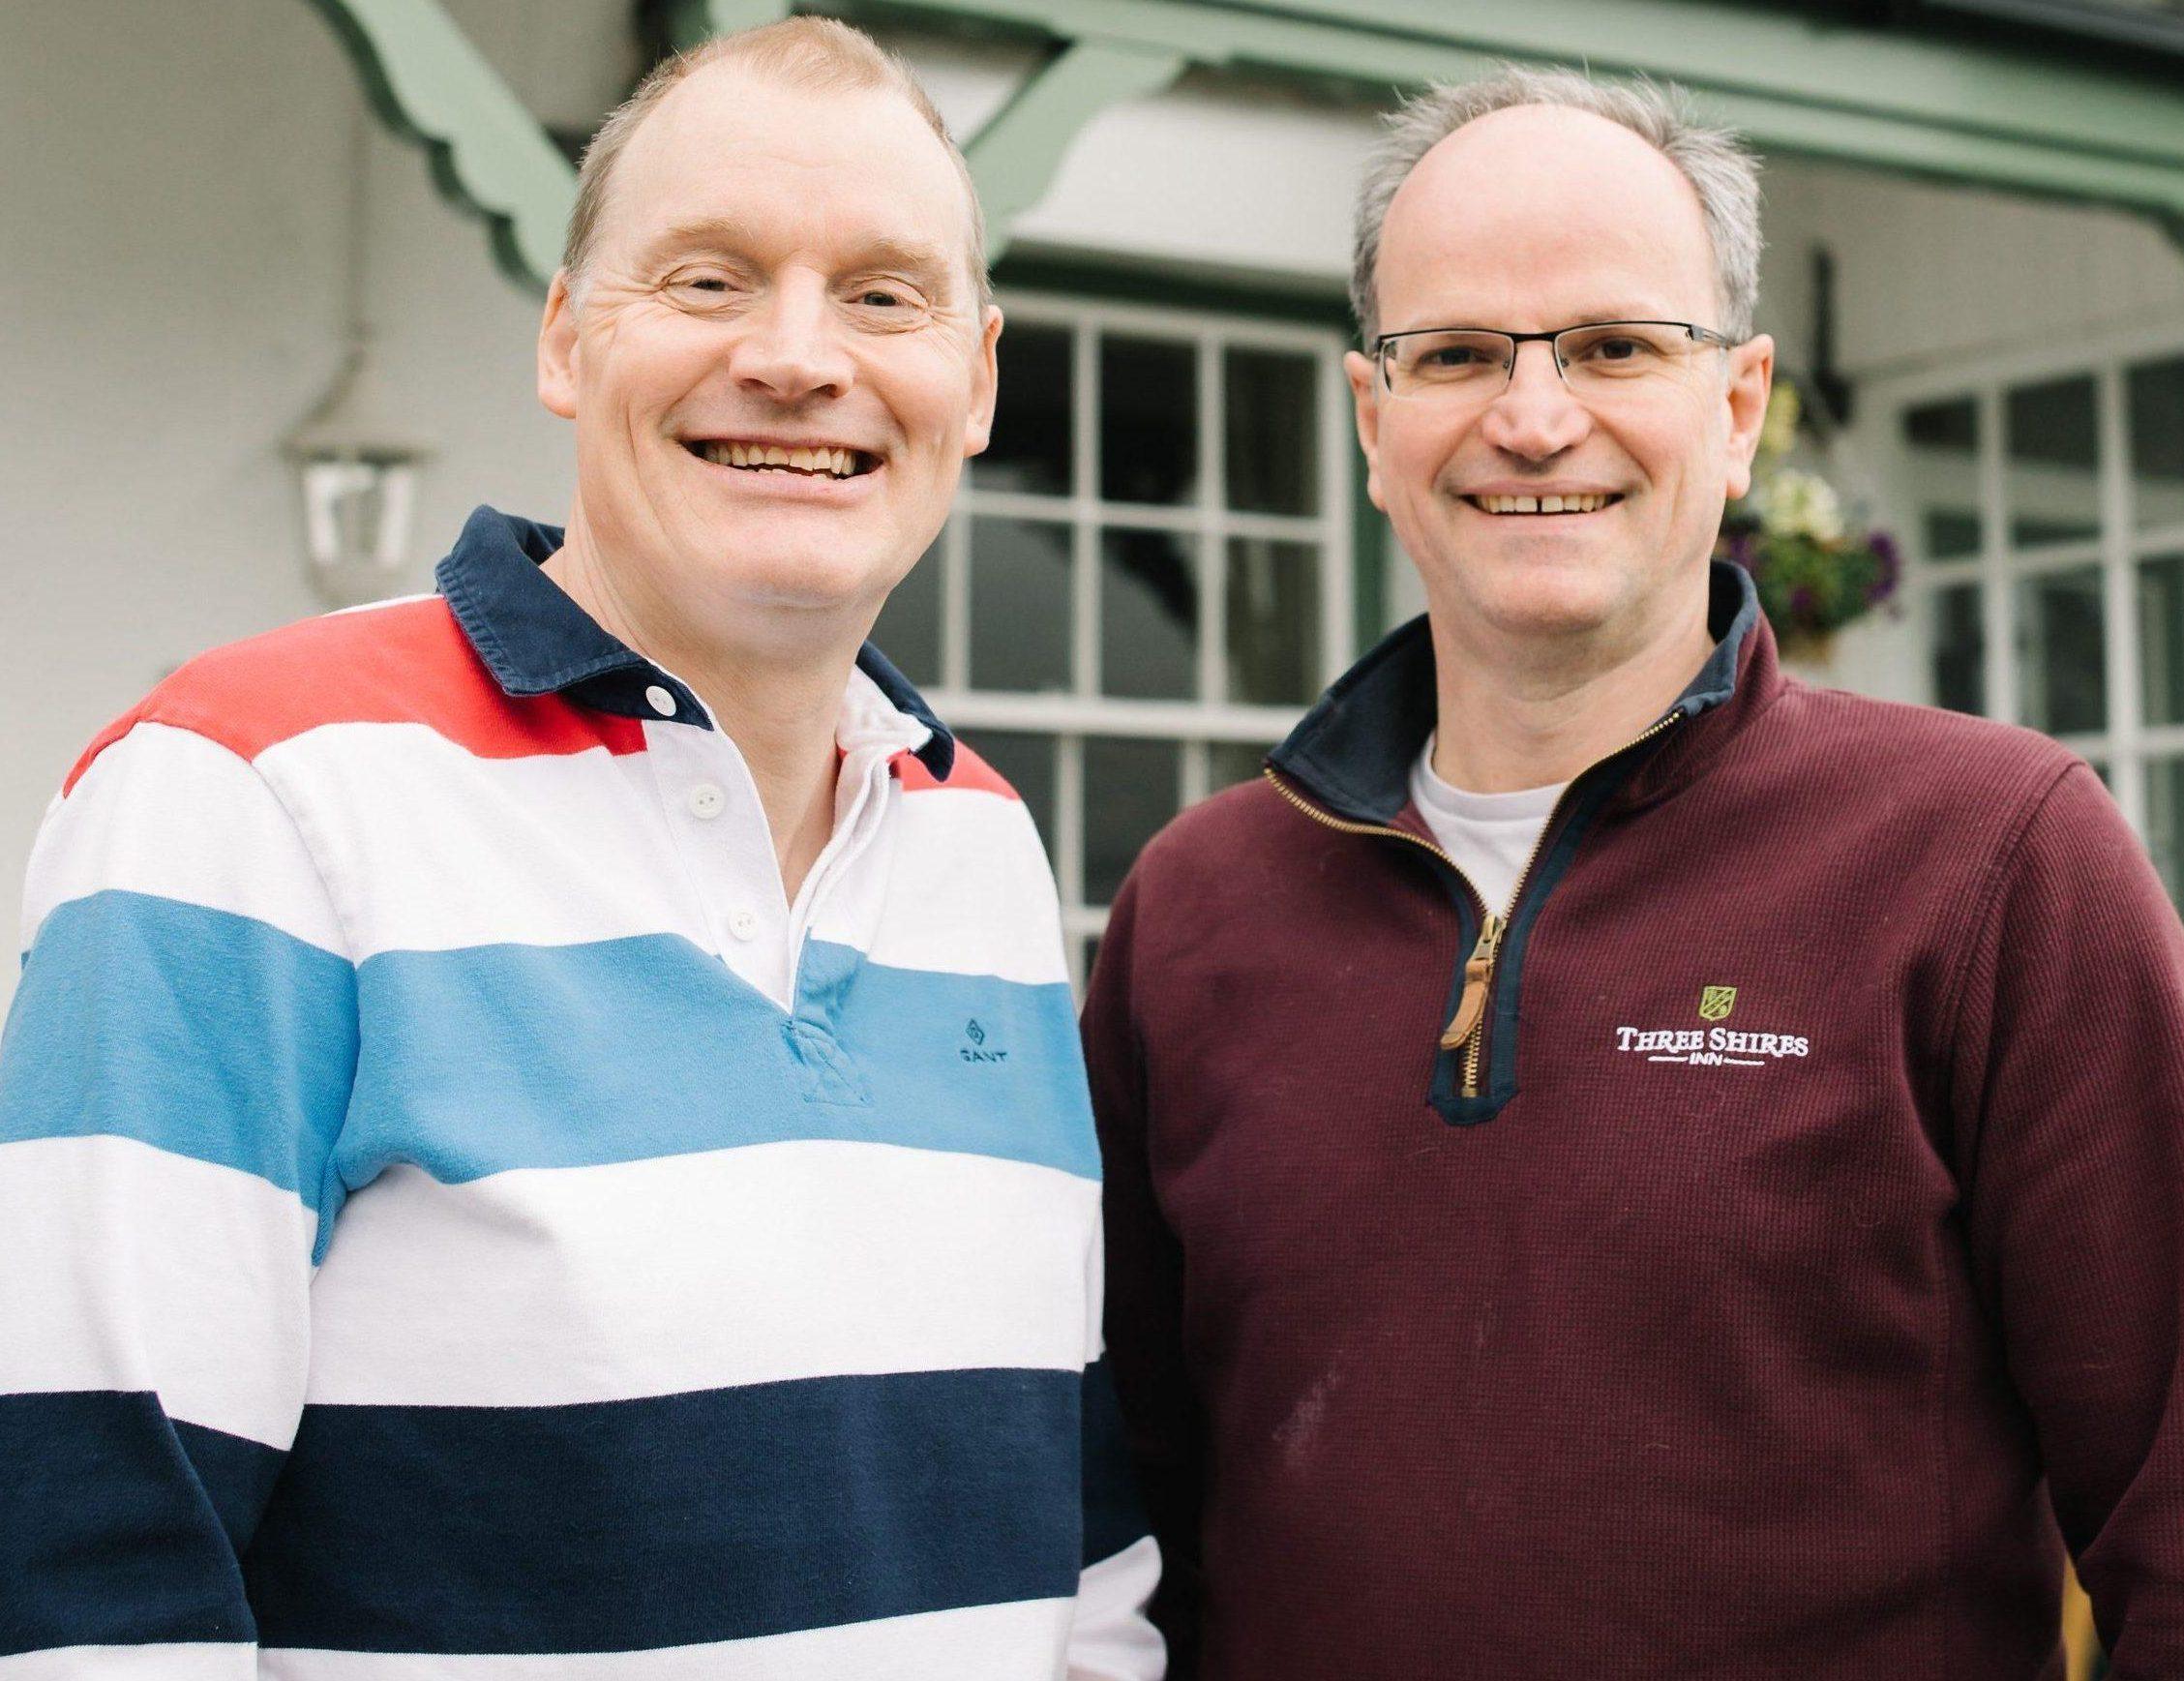 Co-owners of The Three Shires Inn, James and Tony